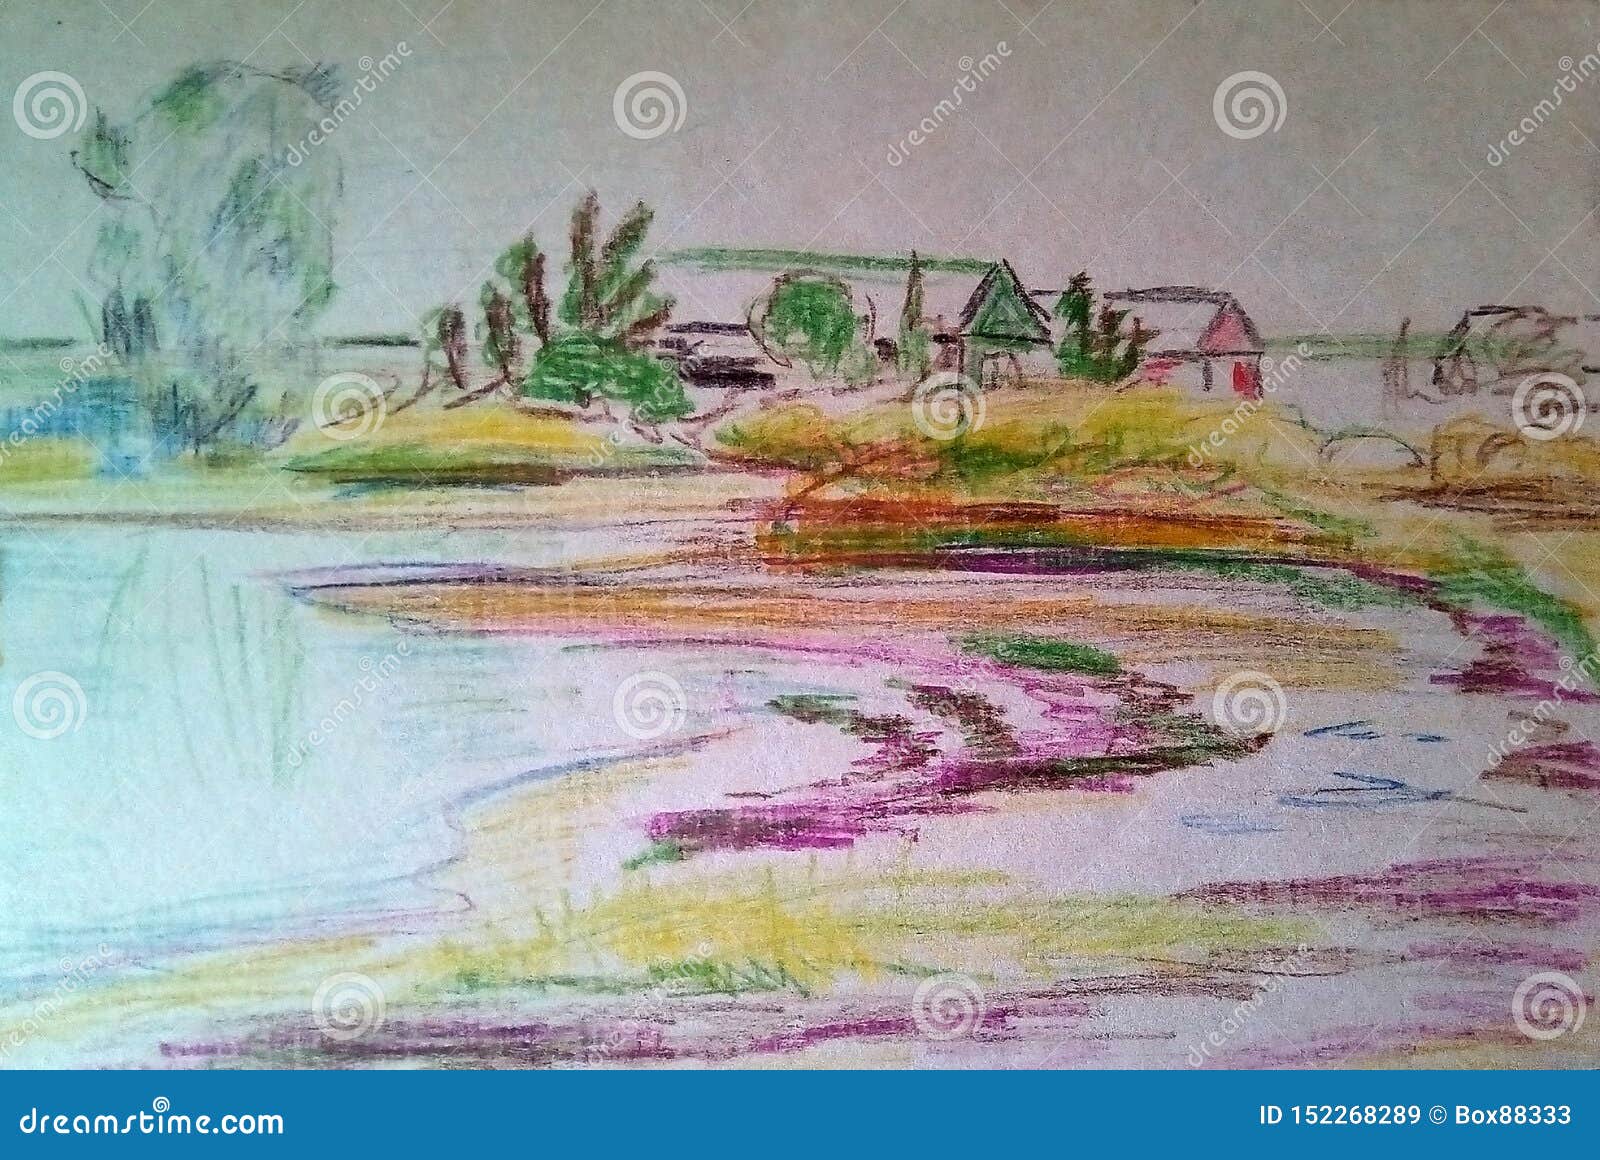 Autumn Landscape Drawing Watercolor Color Pencil Hand Drawn Illustration  Stock Illustration by ©tiff20 #206450676